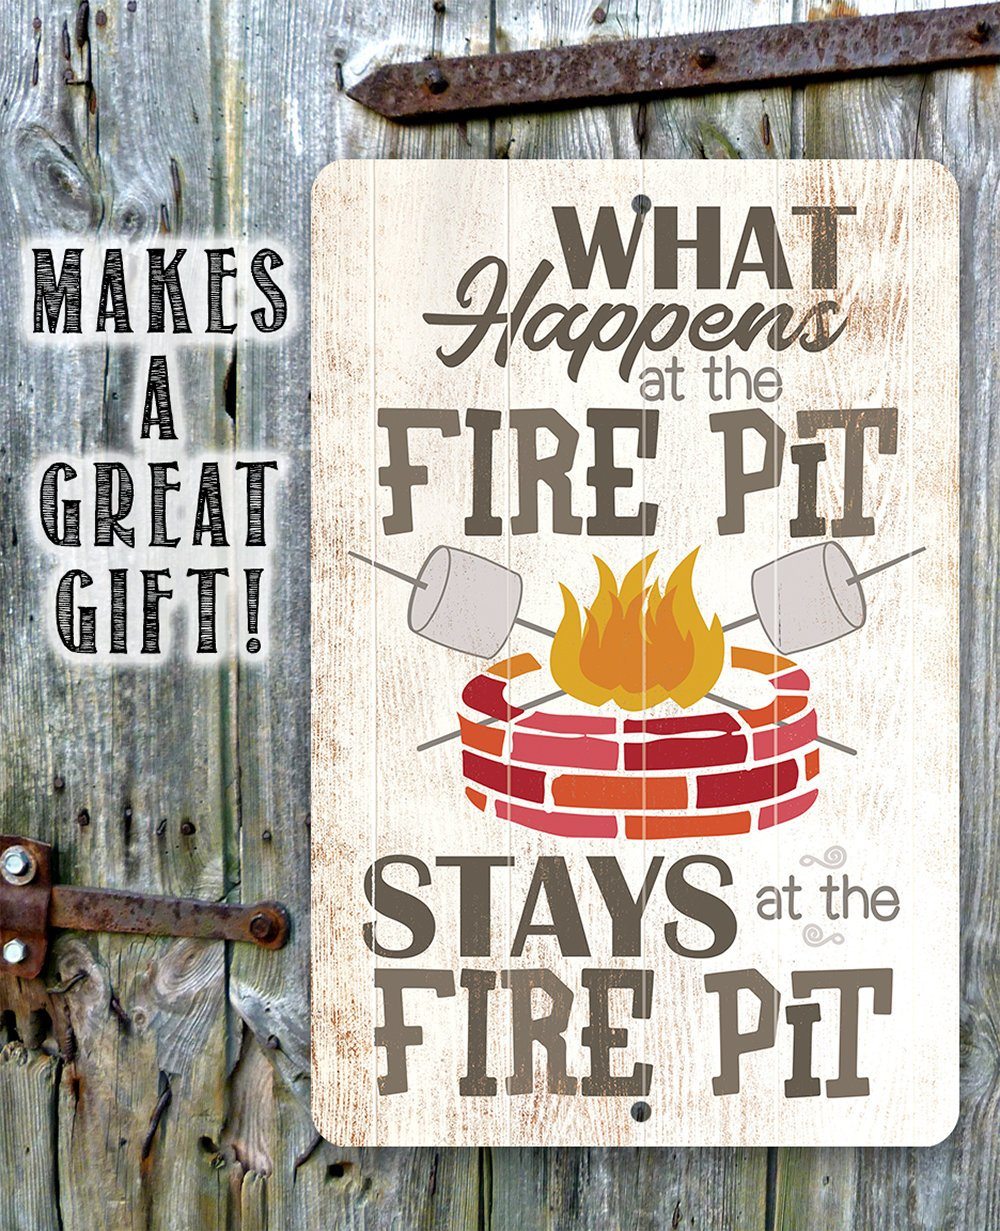 What Happens At The Firepit - Metal Sign | Lone Star Art.